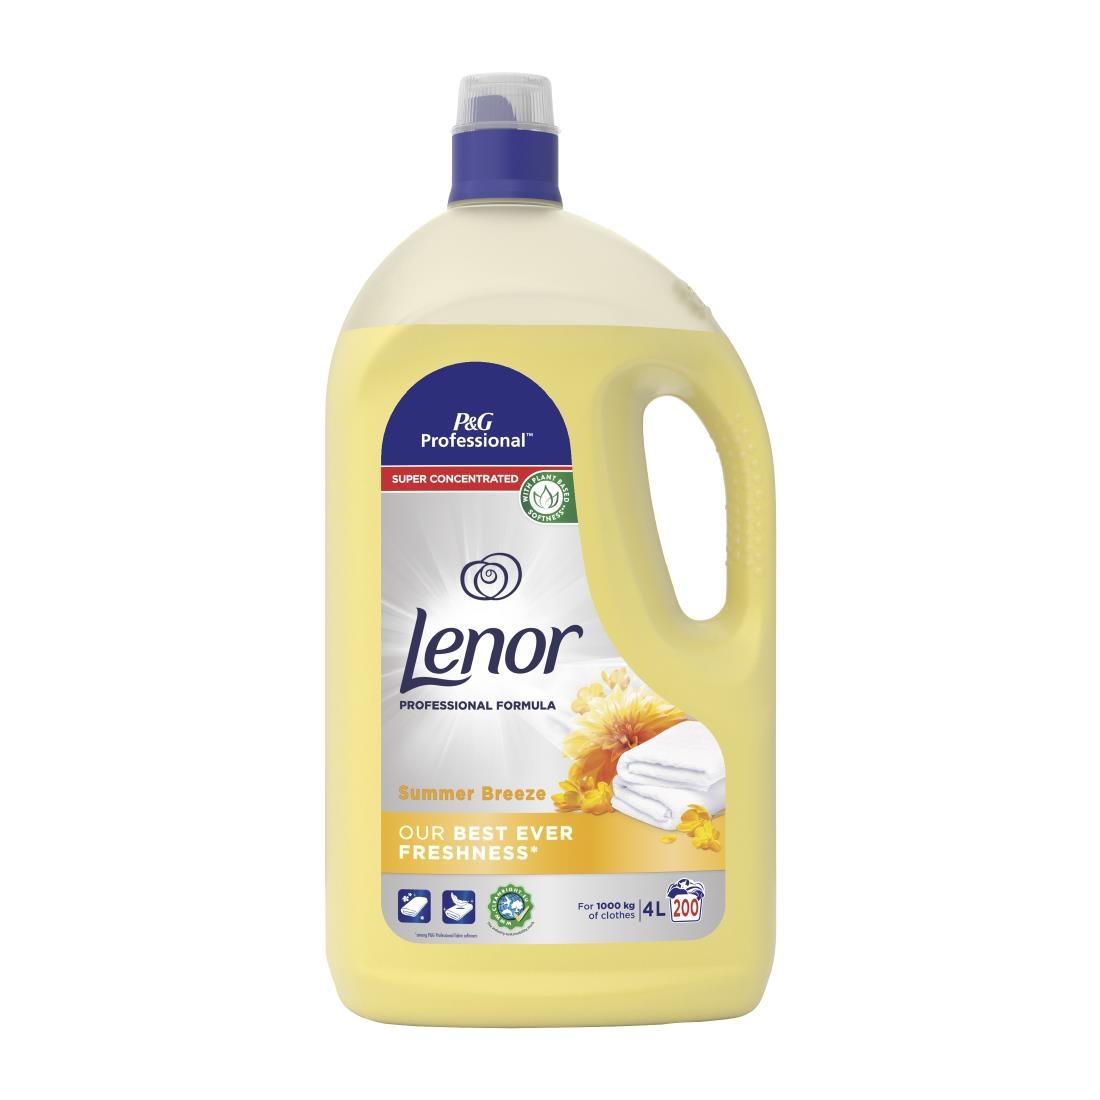 Lenor Professional Fabric Conditioner Summer Breeze 4Ltr Pack of 3 (DZ454)